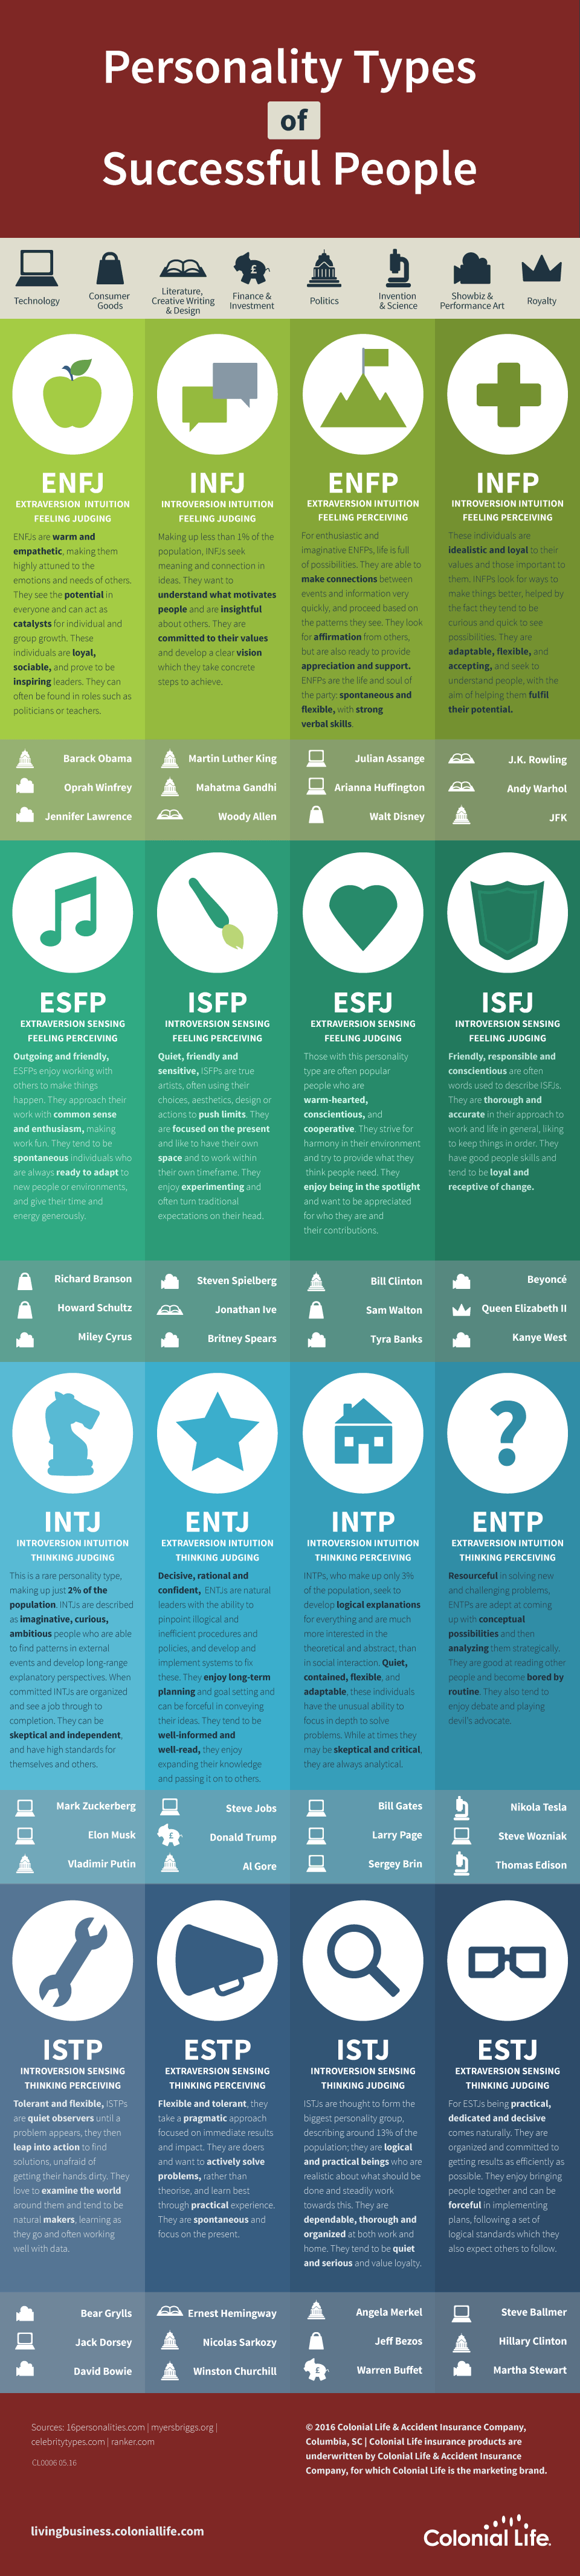 Personality Types Of Successful People - #infographic